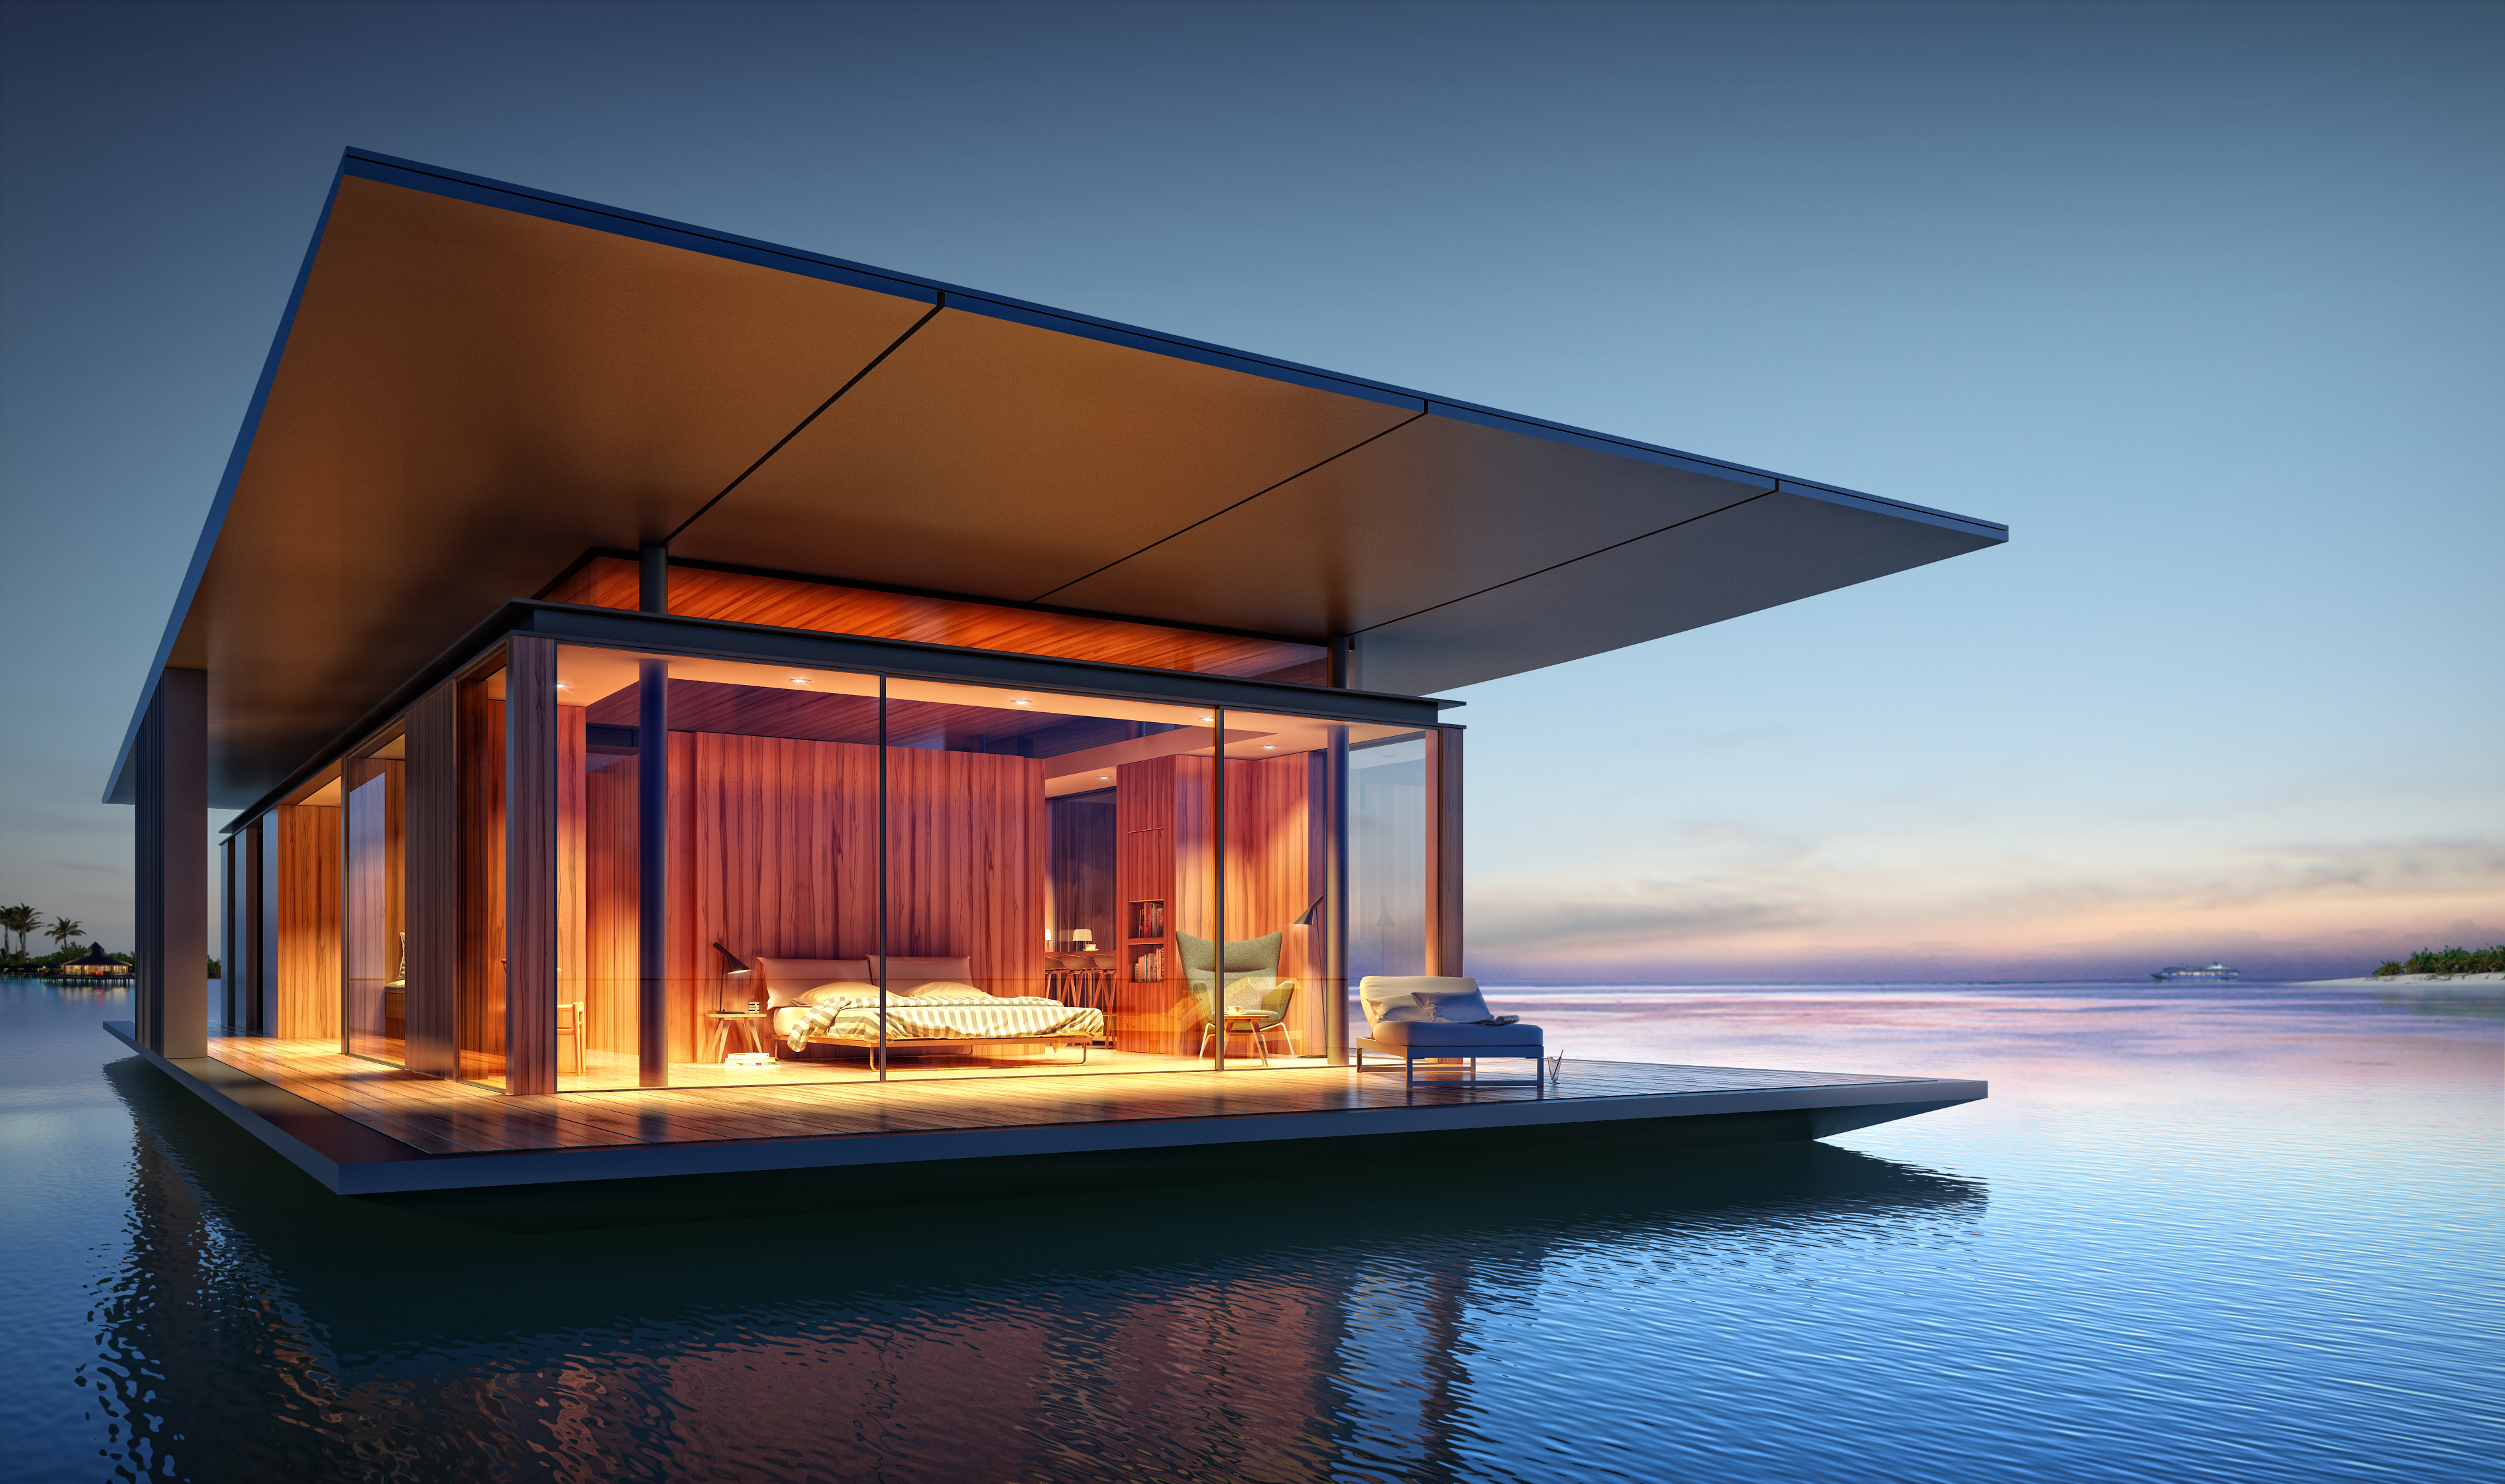 This floating home concept was designed by the Singapore-based architect Dymitr Malcew to offer luxury on the water. The home sits on a floating, transportable platform.